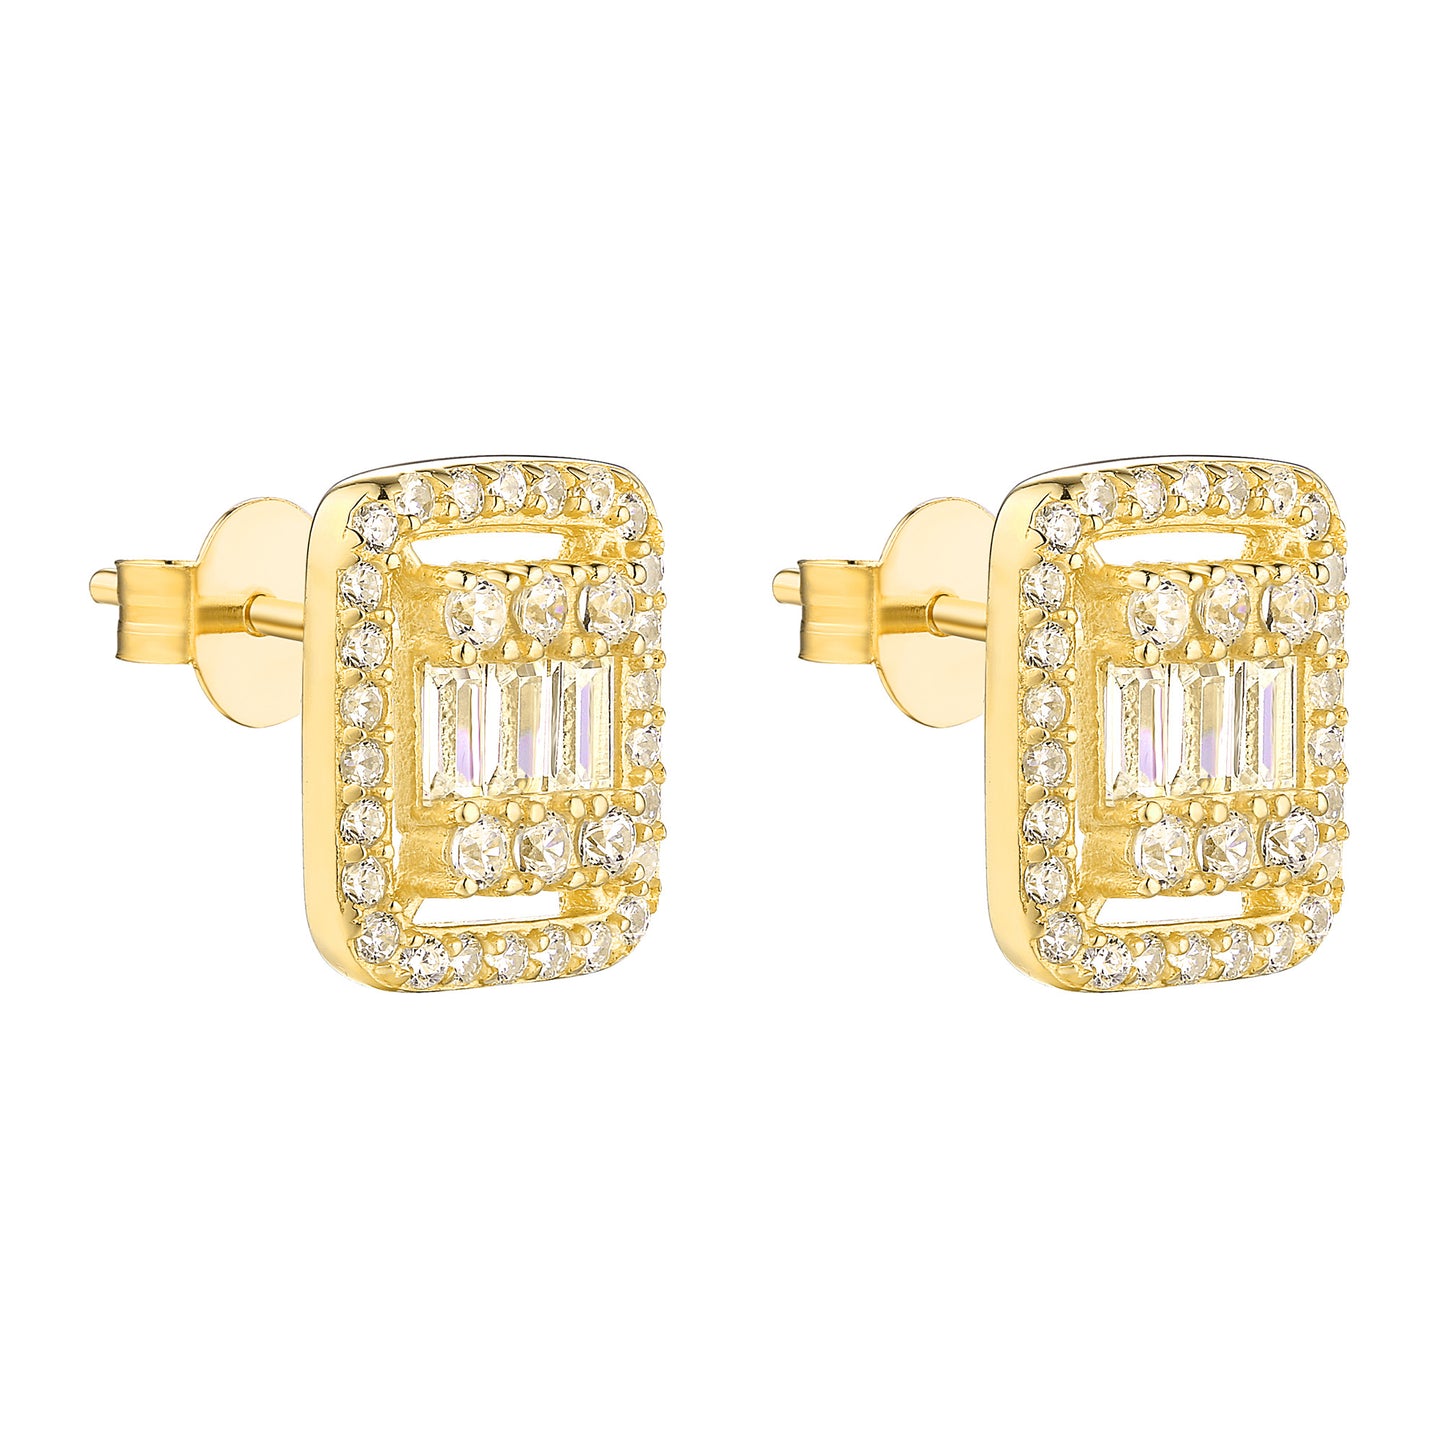 Baguette Earrings Simulated Diamonds Yellow Sterling Silver